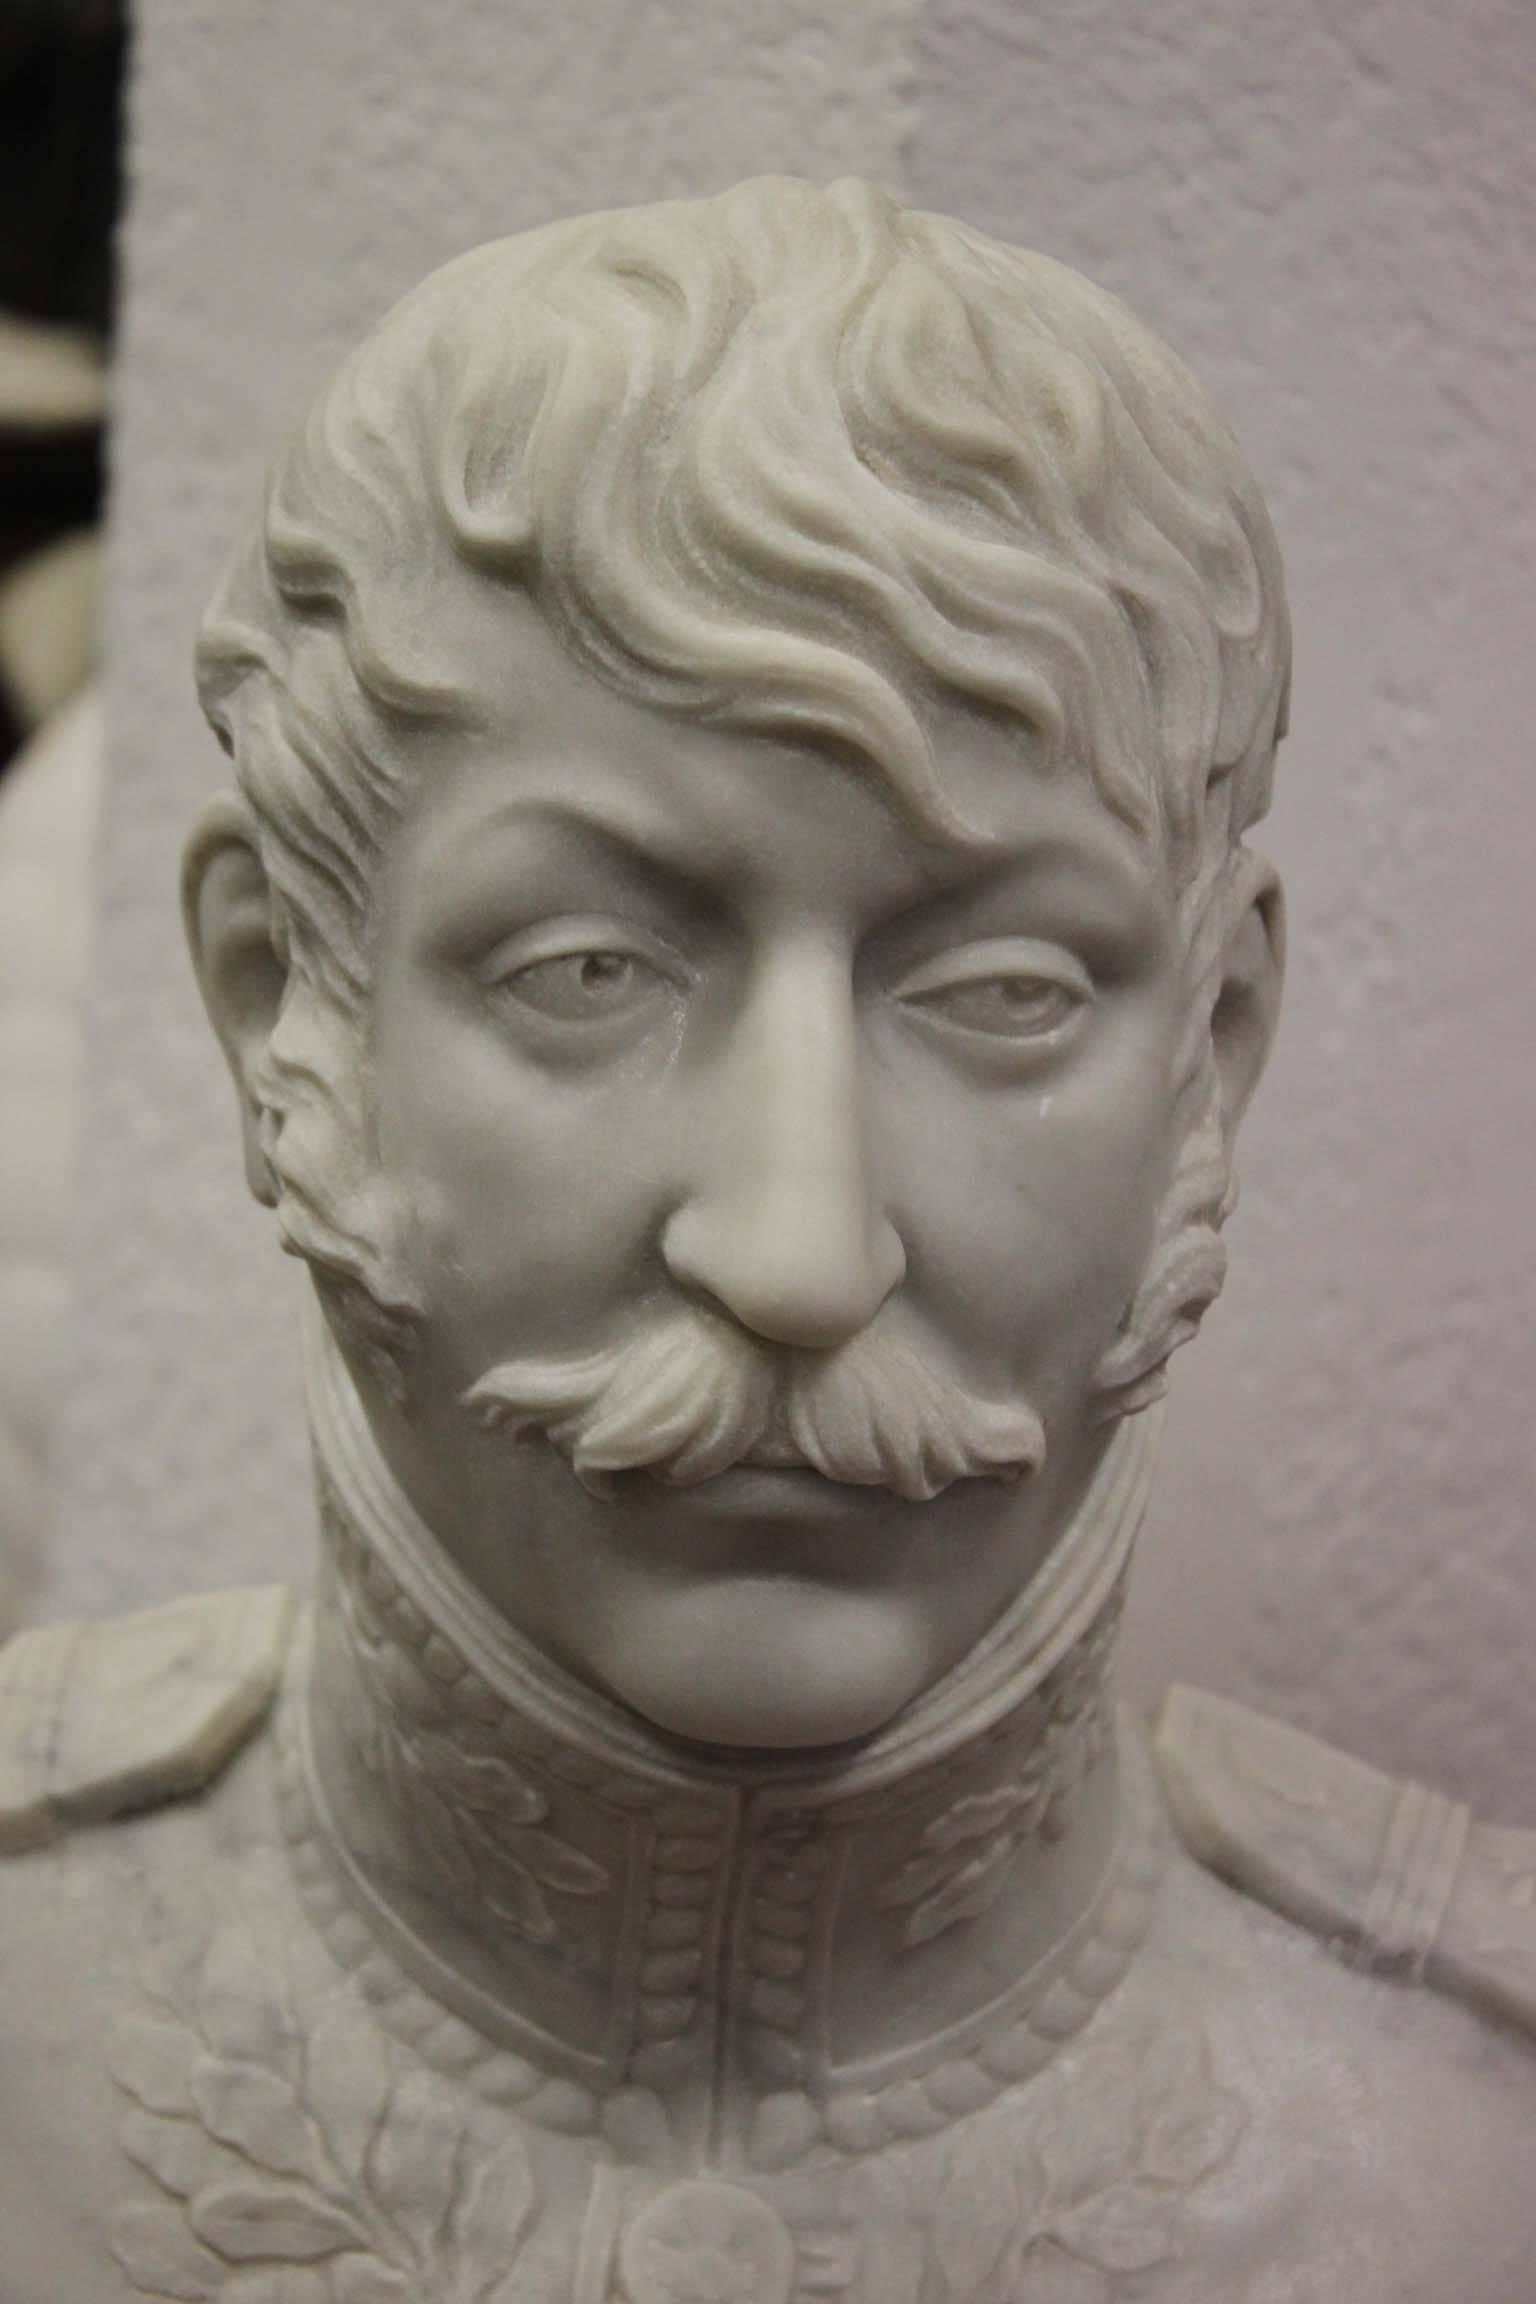 General of the Empire marble bust, Empire period, 19th century. In perfect condition.
Dimensions: Width 40cm, height 41cm, depth 21cm.